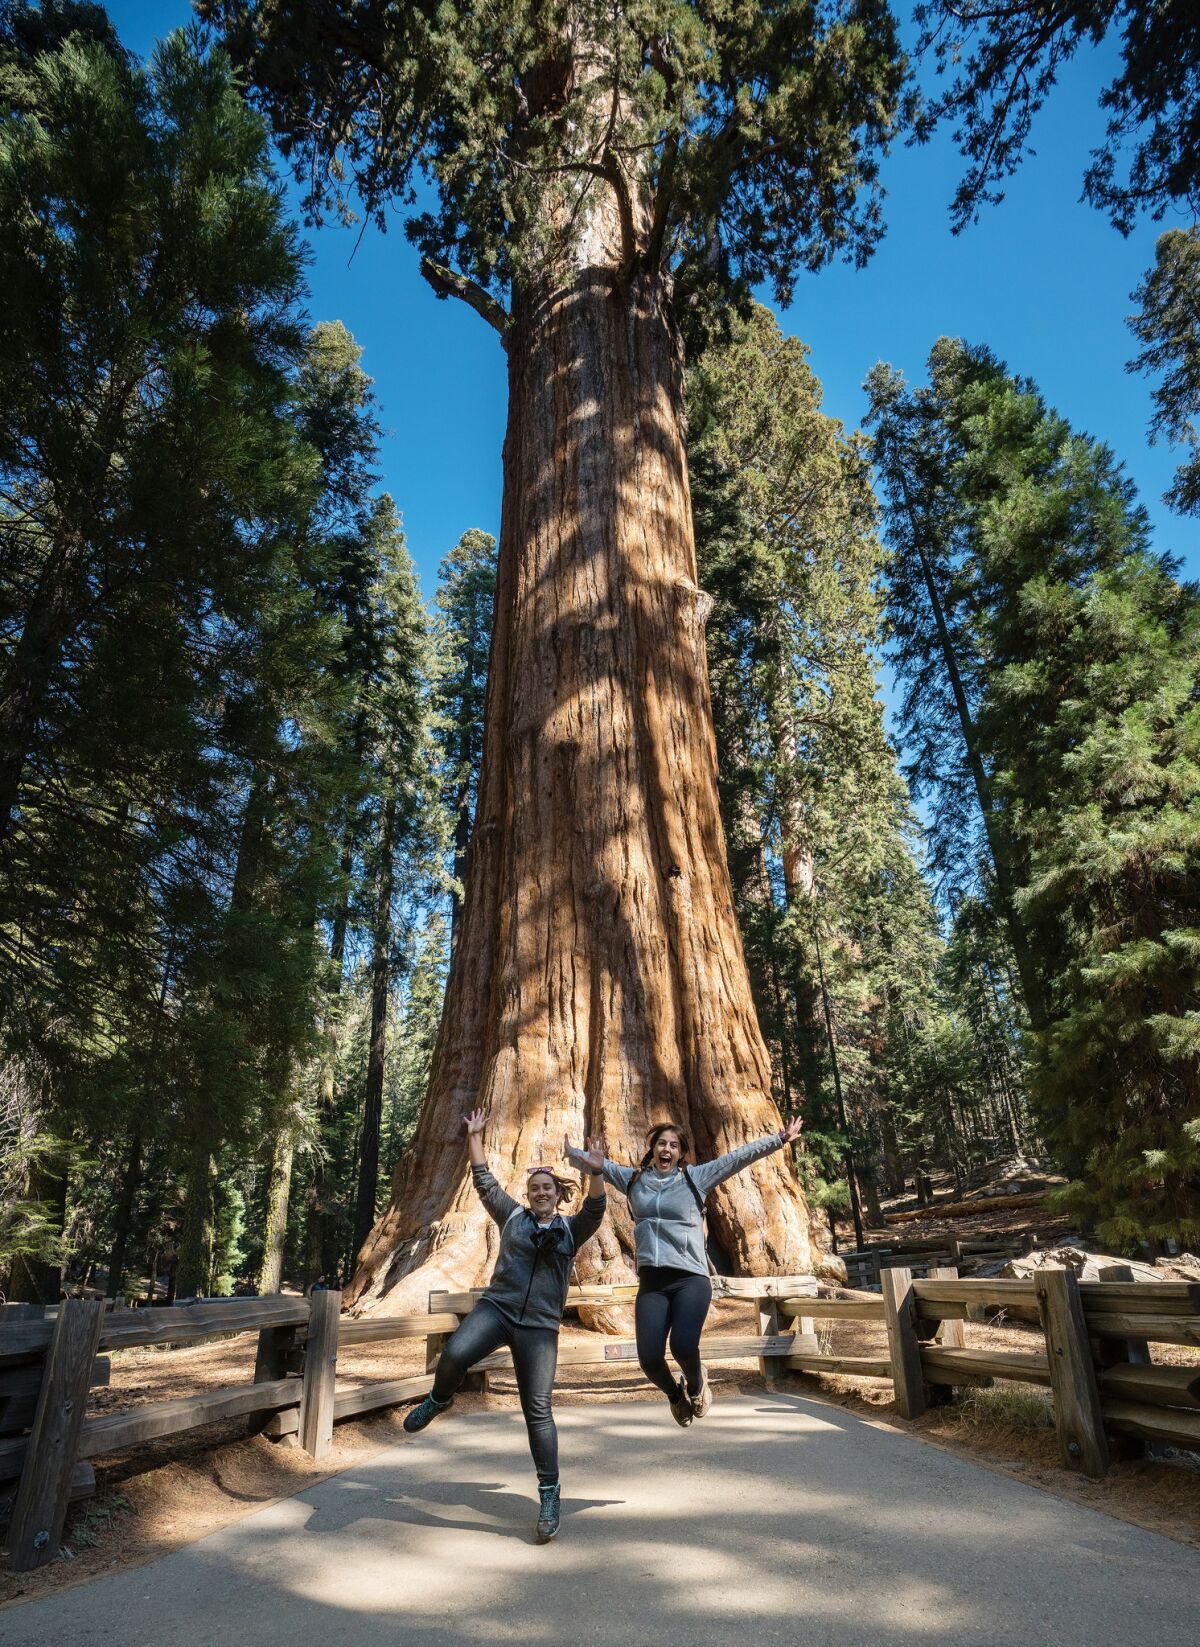 Eva Uceda Serralle and Raquel Lozano snap a photo with General Sherman, the world's biggest tree, during their recent visit from Spain.